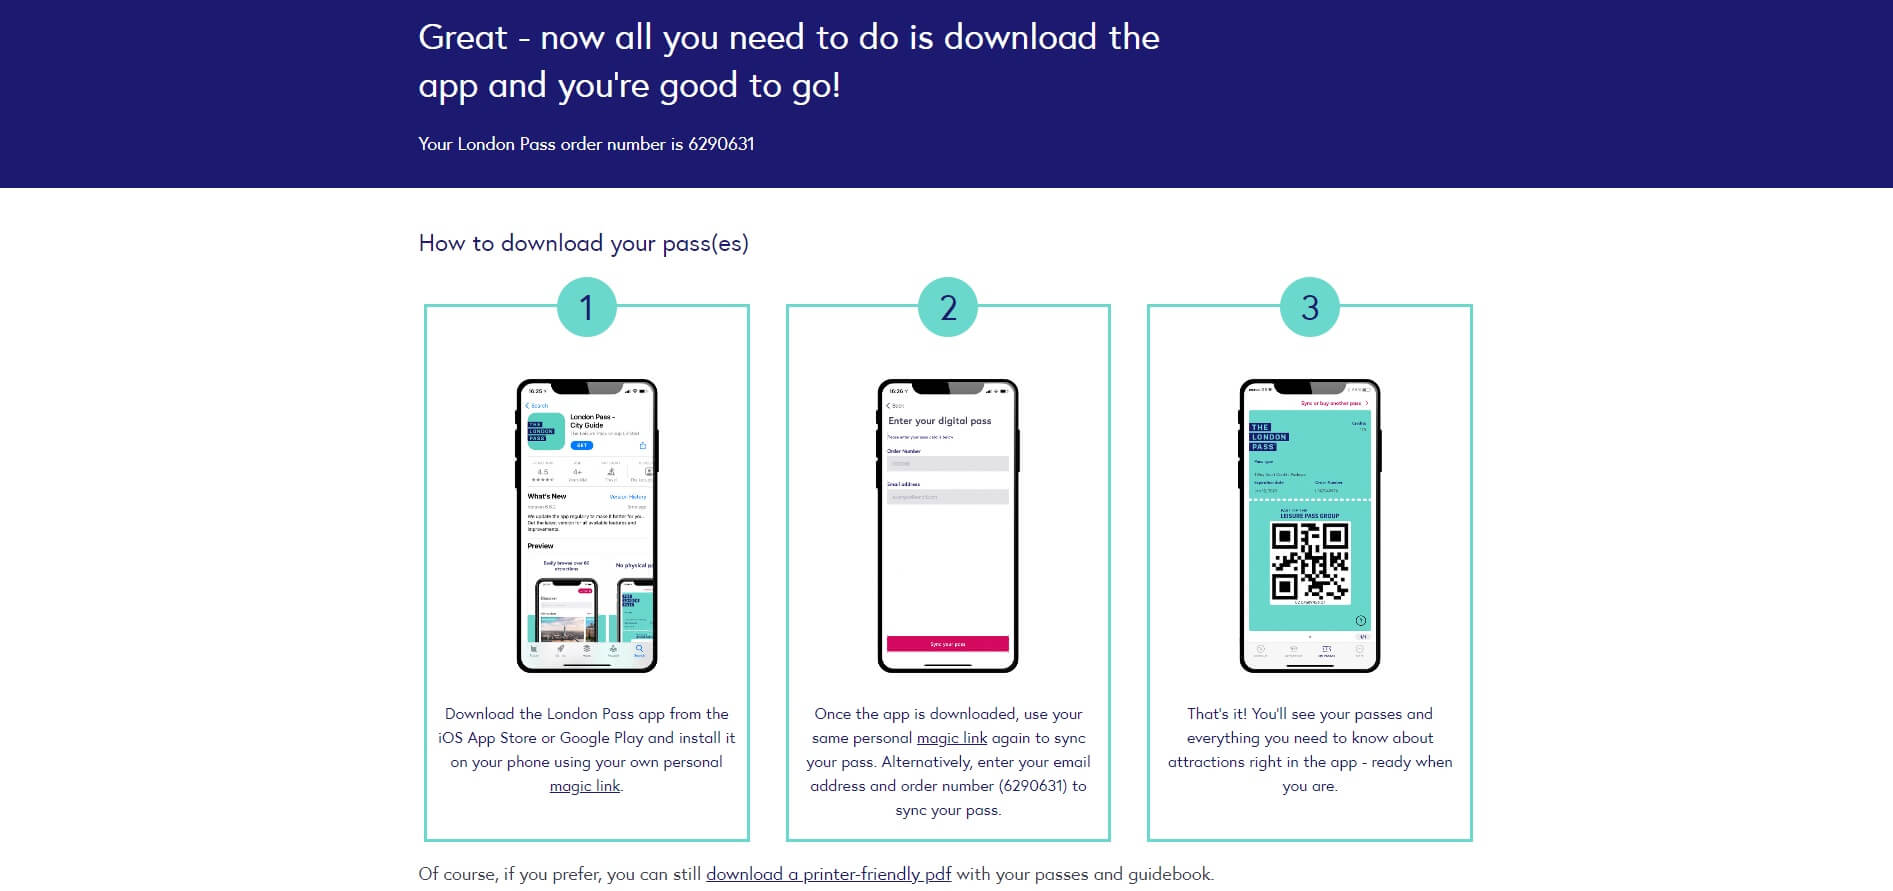 How to download The London Pass app